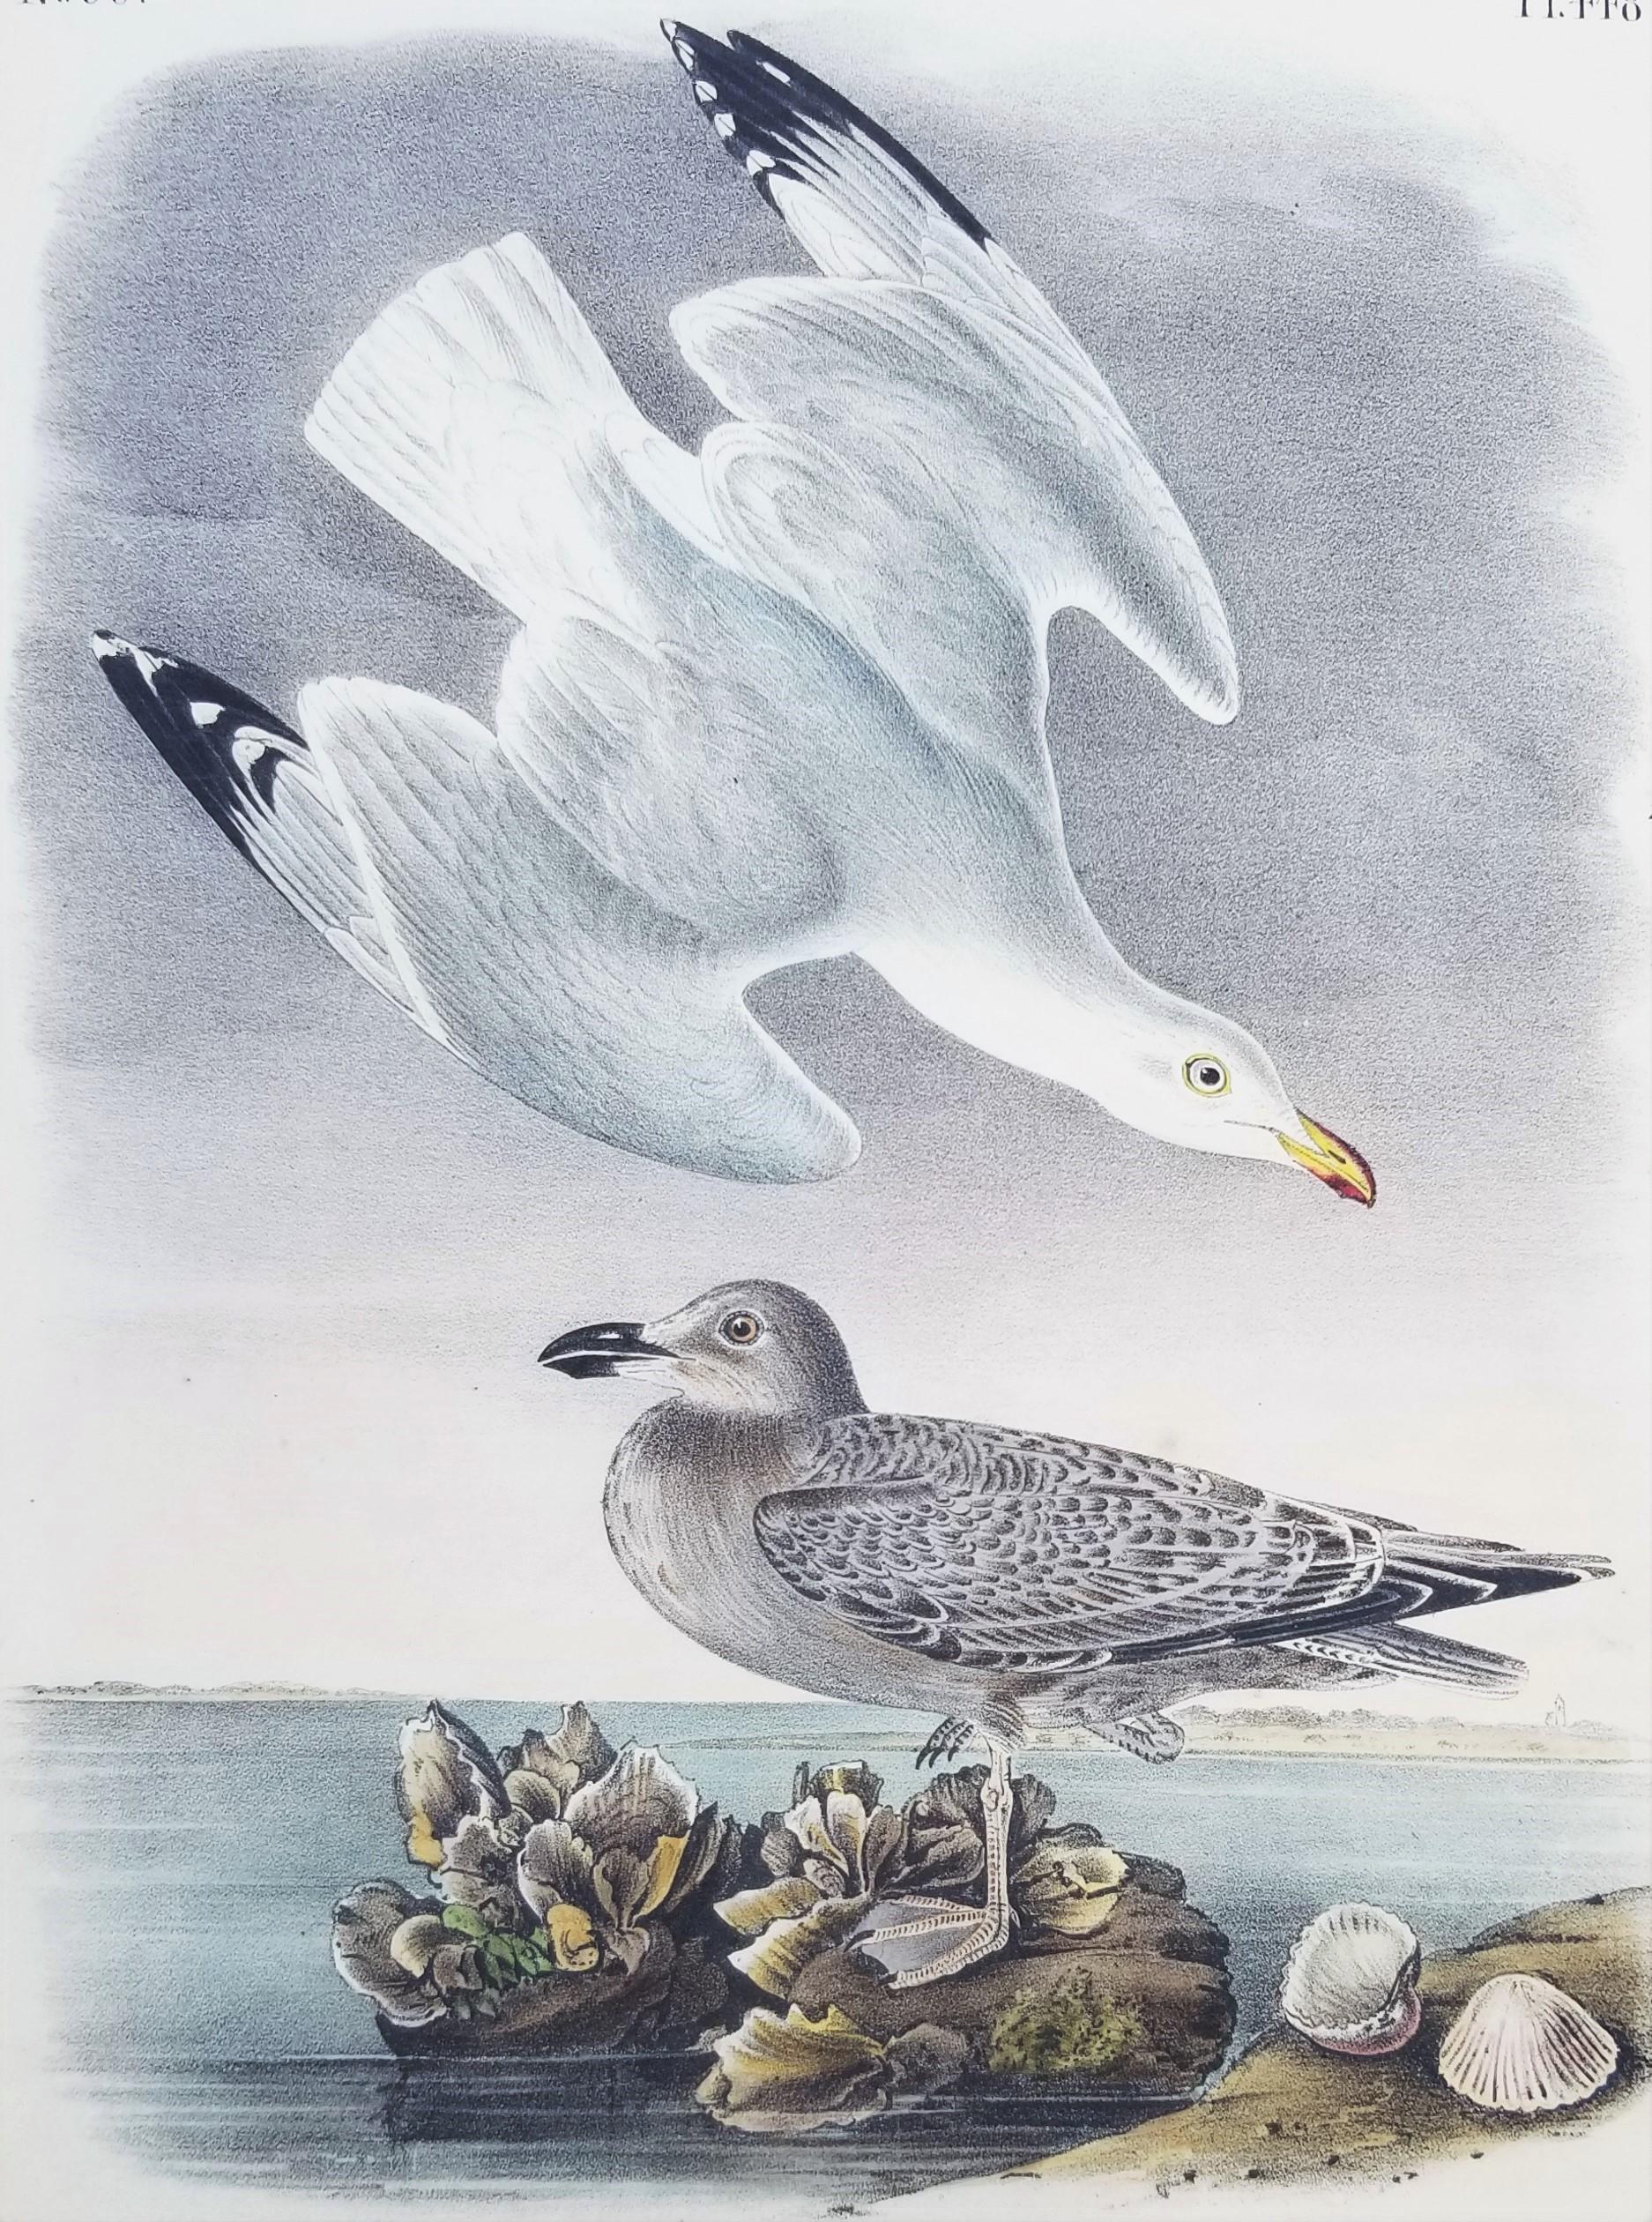 Artist: John James Audubon (American, 1785-1851)
Title: "Herring or Silvery Gull" (Plate 448, No. 90)
Portfolio: The Birds of America, First Royal Octavo Edition
Year: 1840-1844
Medium: Original Hand-Colored Lithograph on wove paper
Limited edition: